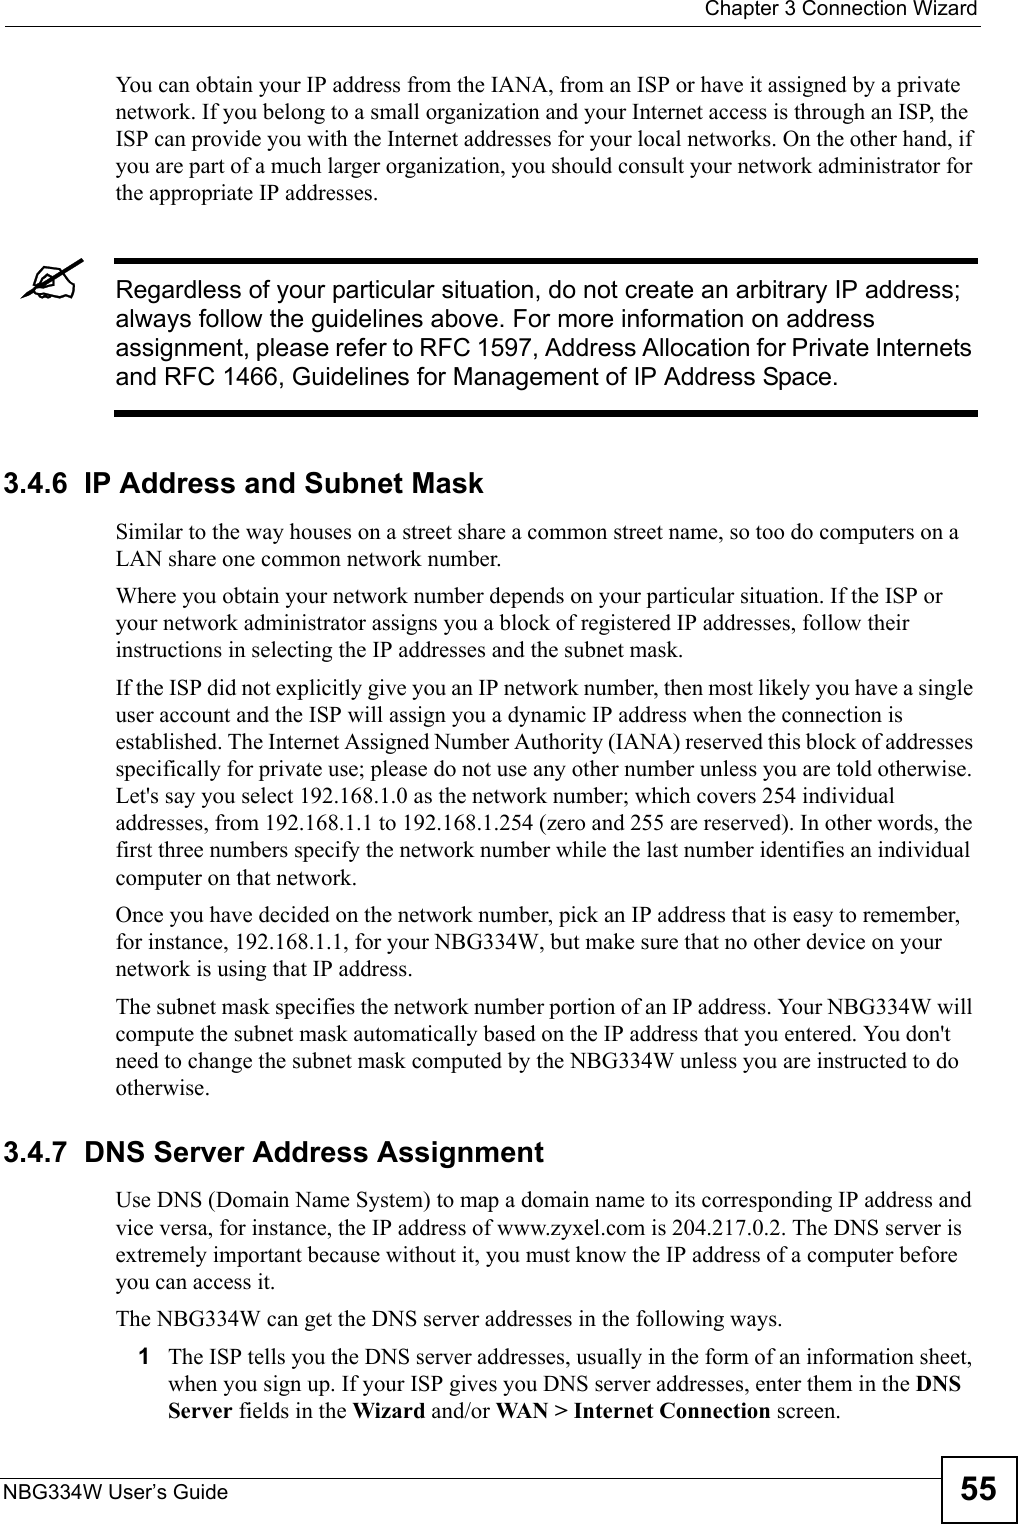  Chapter 3 Connection WizardNBG334W User’s Guide 55You can obtain your IP address from the IANA, from an ISP or have it assigned by a private network. If you belong to a small organization and your Internet access is through an ISP, the ISP can provide you with the Internet addresses for your local networks. On the other hand, if you are part of a much larger organization, you should consult your network administrator for the appropriate IP addresses.&quot;Regardless of your particular situation, do not create an arbitrary IP address; always follow the guidelines above. For more information on address assignment, please refer to RFC 1597, Address Allocation for Private Internets and RFC 1466, Guidelines for Management of IP Address Space.3.4.6  IP Address and Subnet MaskSimilar to the way houses on a street share a common street name, so too do computers on a LAN share one common network number.Where you obtain your network number depends on your particular situation. If the ISP or your network administrator assigns you a block of registered IP addresses, follow their instructions in selecting the IP addresses and the subnet mask.If the ISP did not explicitly give you an IP network number, then most likely you have a single user account and the ISP will assign you a dynamic IP address when the connection is established. The Internet Assigned Number Authority (IANA) reserved this block of addresses specifically for private use; please do not use any other number unless you are told otherwise. Let&apos;s say you select 192.168.1.0 as the network number; which covers 254 individual addresses, from 192.168.1.1 to 192.168.1.254 (zero and 255 are reserved). In other words, the first three numbers specify the network number while the last number identifies an individual computer on that network.Once you have decided on the network number, pick an IP address that is easy to remember, for instance, 192.168.1.1, for your NBG334W, but make sure that no other device on your network is using that IP address.The subnet mask specifies the network number portion of an IP address. Your NBG334W will compute the subnet mask automatically based on the IP address that you entered. You don&apos;t need to change the subnet mask computed by the NBG334W unless you are instructed to do otherwise.3.4.7  DNS Server Address AssignmentUse DNS (Domain Name System) to map a domain name to its corresponding IP address and vice versa, for instance, the IP address of www.zyxel.com is 204.217.0.2. The DNS server is extremely important because without it, you must know the IP address of a computer before you can access it. The NBG334W can get the DNS server addresses in the following ways.1The ISP tells you the DNS server addresses, usually in the form of an information sheet, when you sign up. If your ISP gives you DNS server addresses, enter them in the DNS Server fields in the Wizard and/or WAN  &gt; Internet Connection screen.